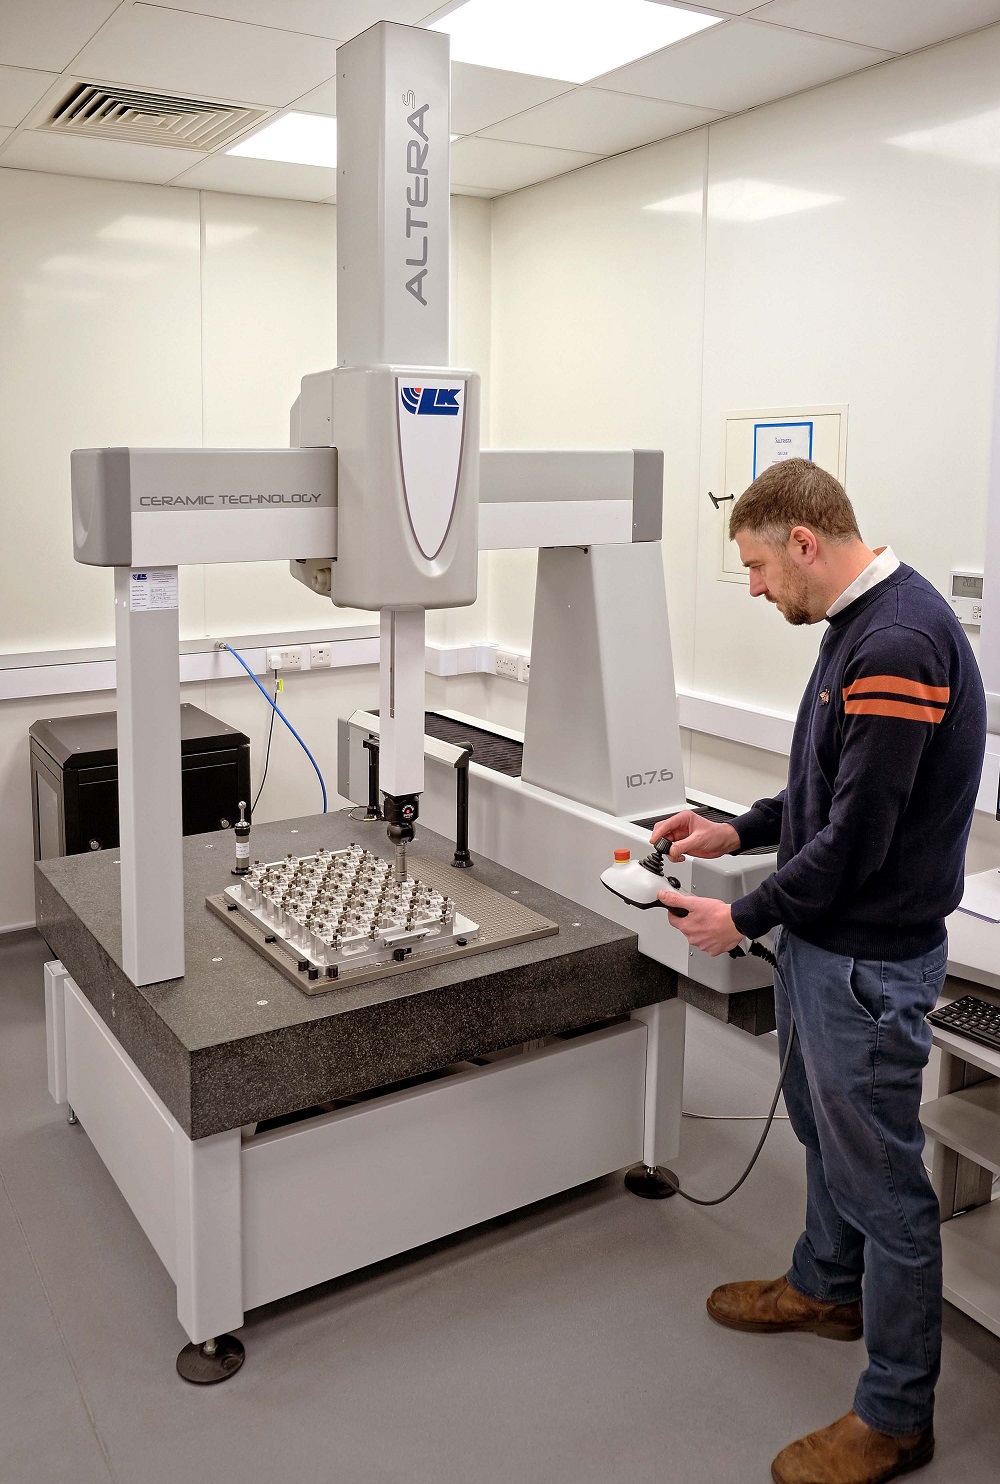 FOOLPROOF AUTOMATED INSPECTION TRANSFORMS MEDICAL MANUFACTURER’S QUALITY CONTROL